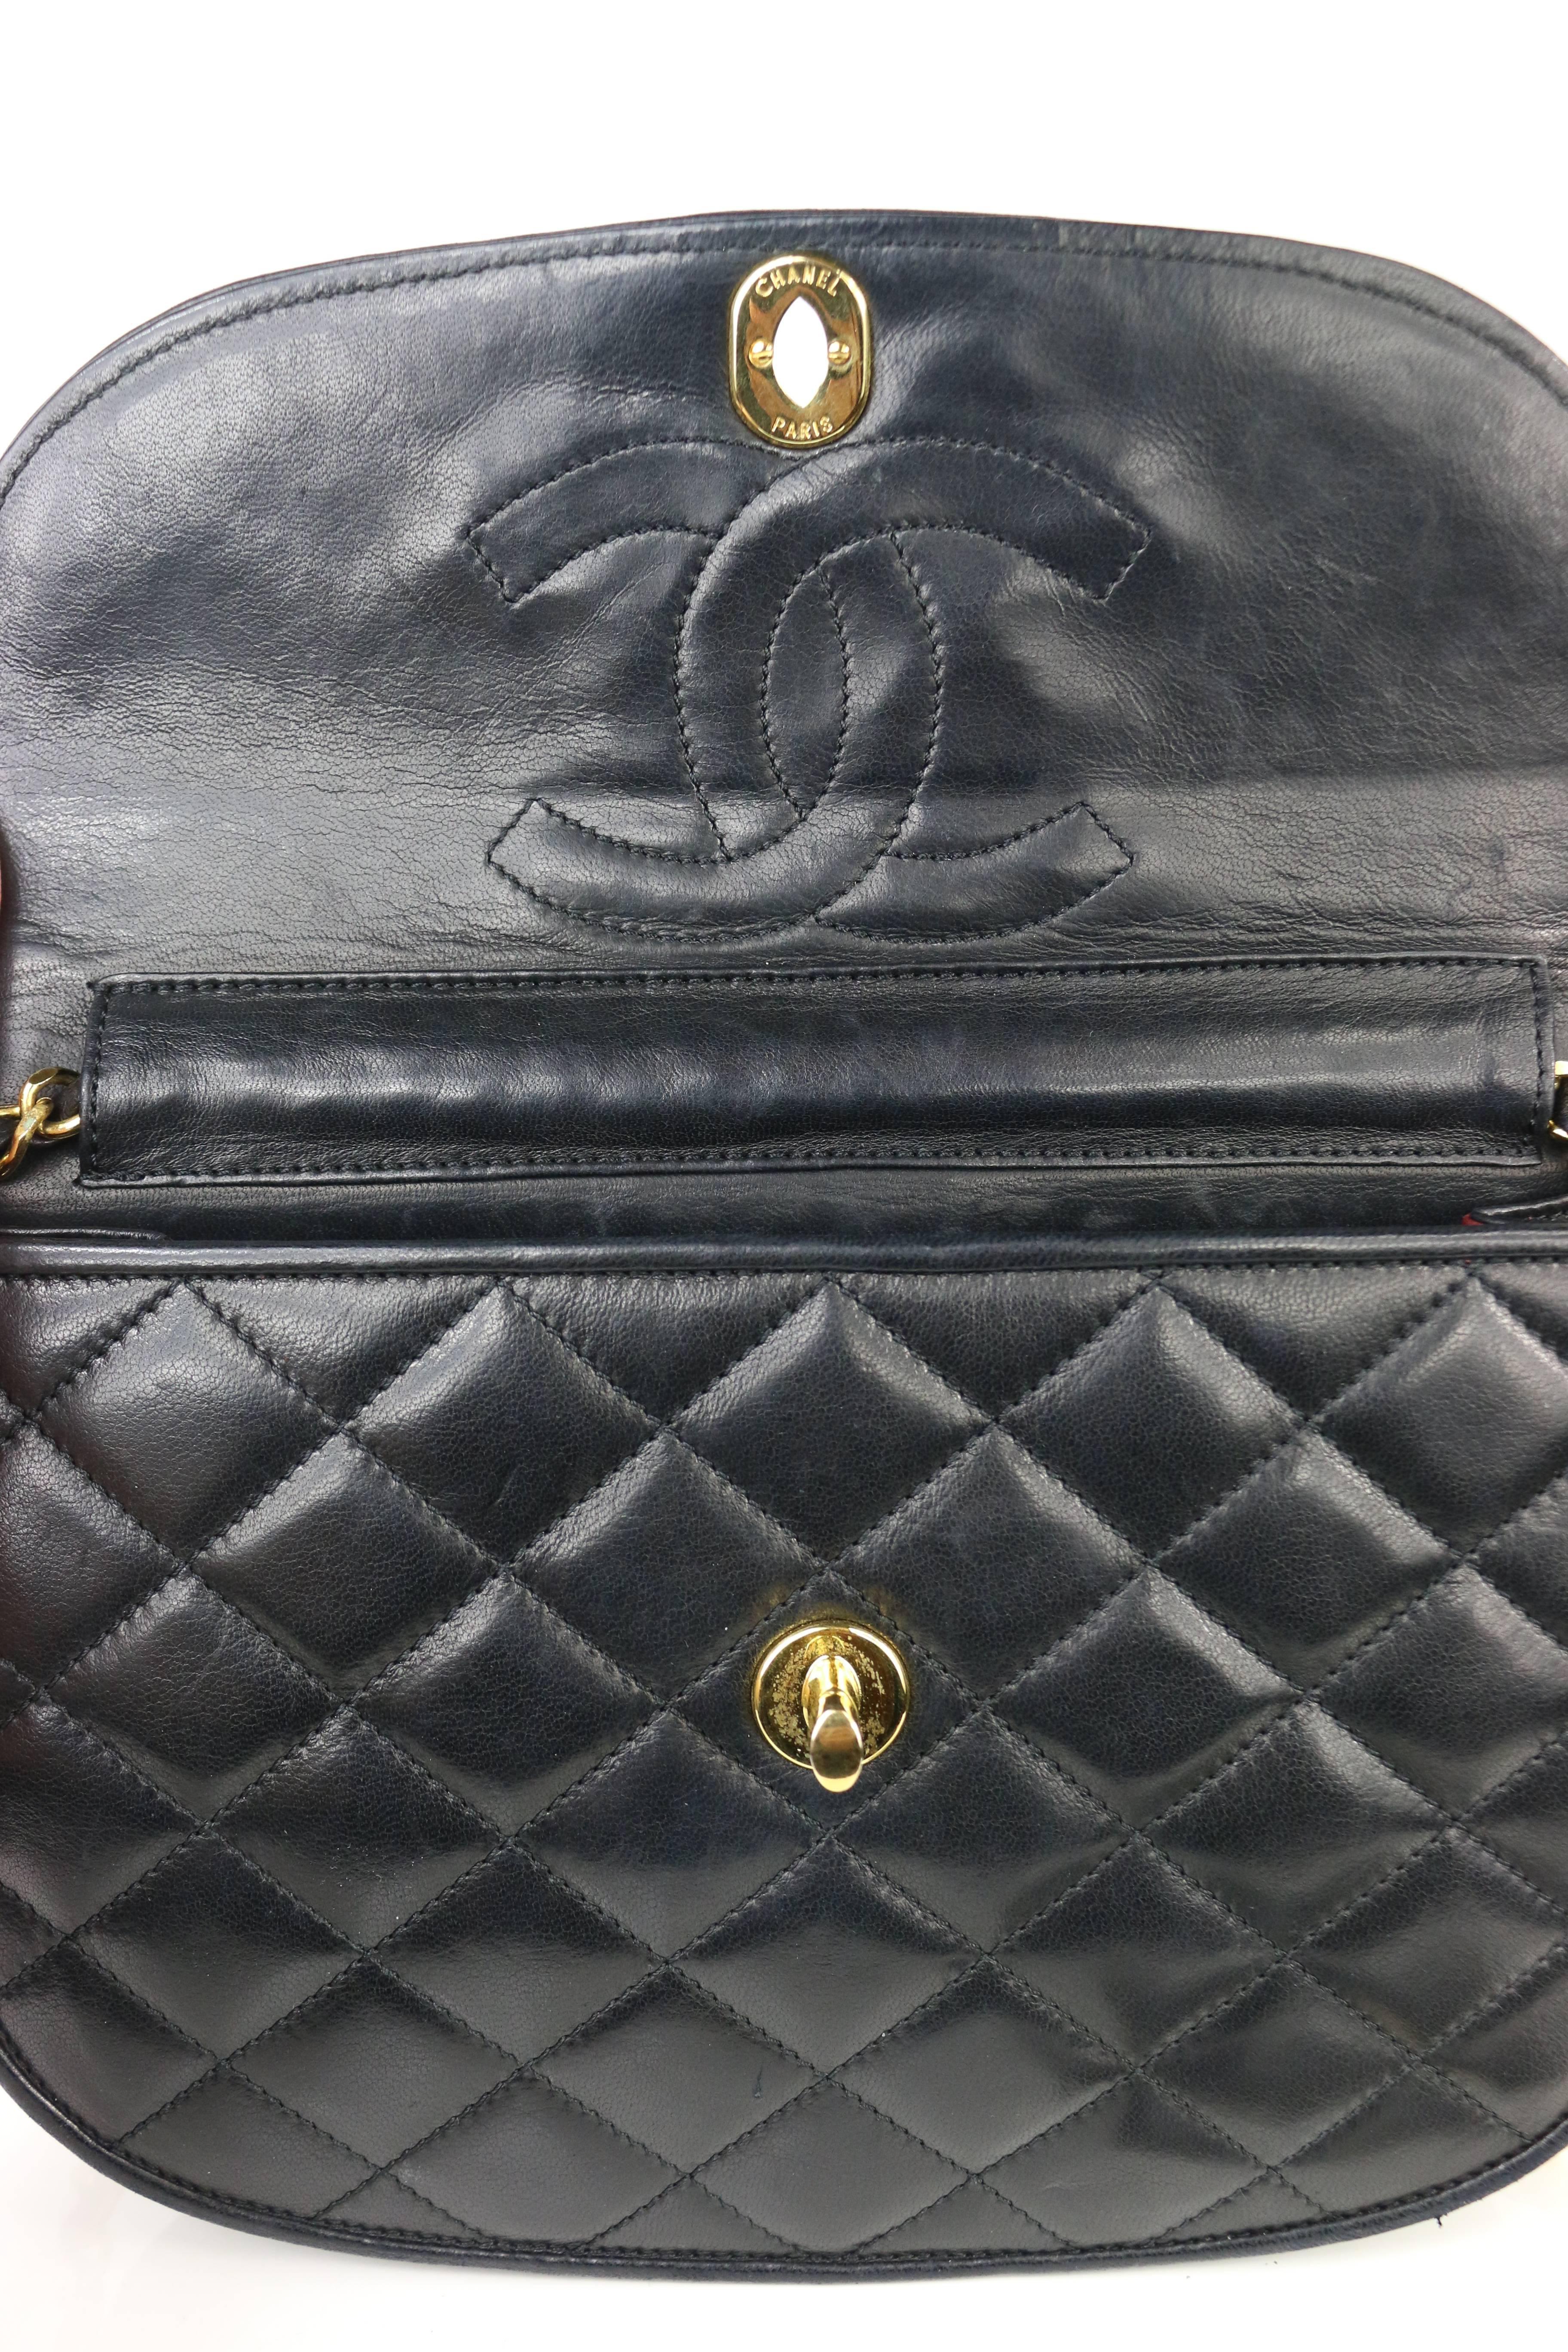 Chanel Semi-Circle Black Quilted Lamb Leather Paris Limited Edition Shoulder Bag 3